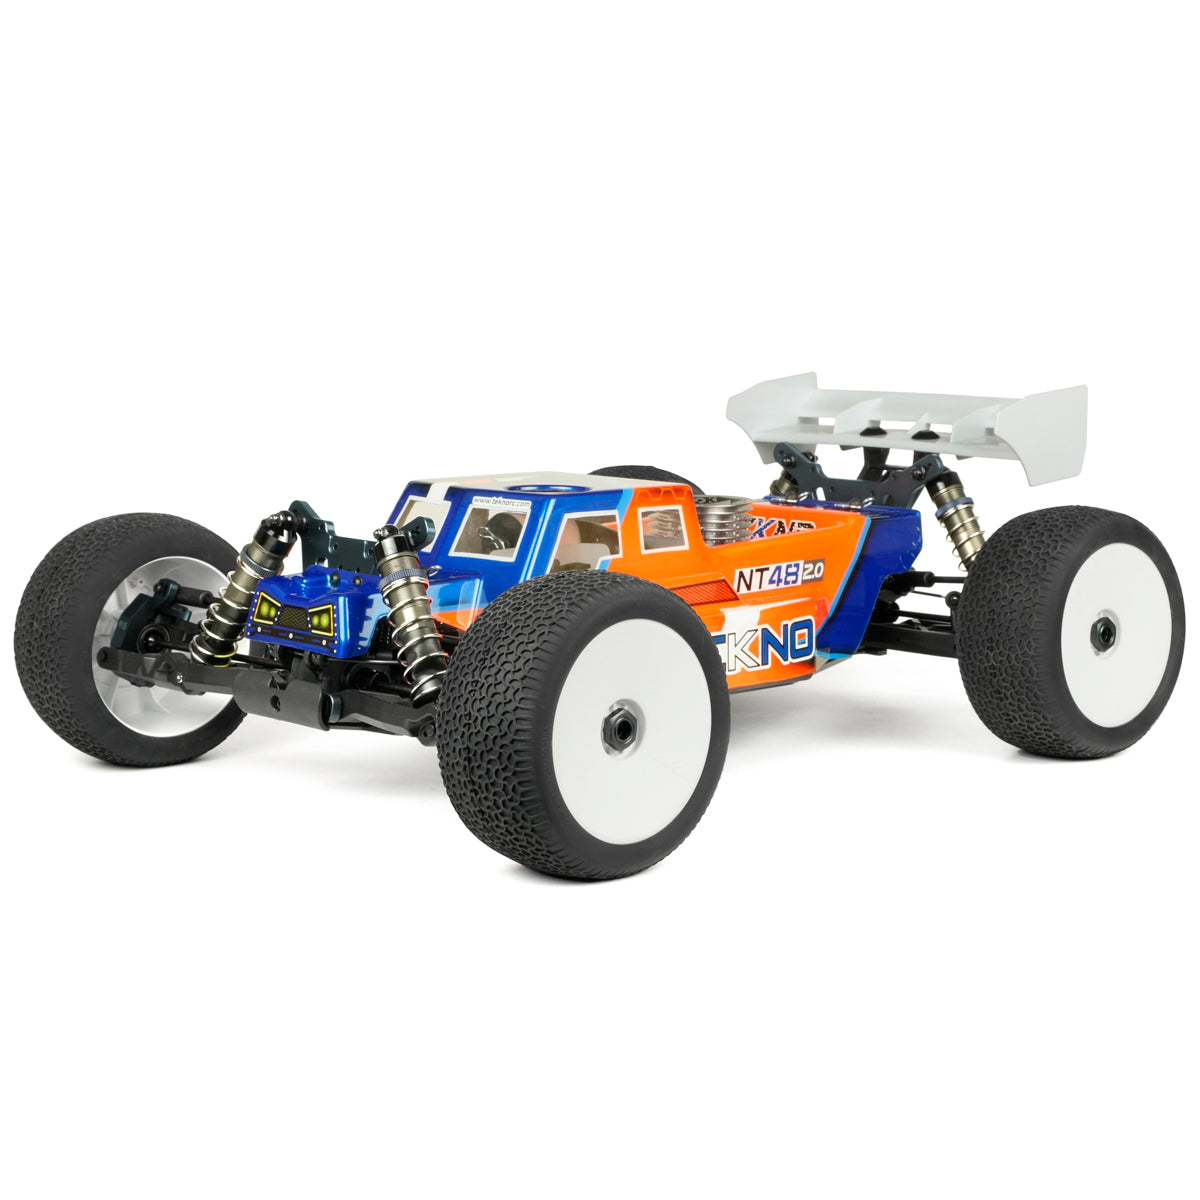 TEKNO TKR9400 NT48 2.0 1/8 4WD Off-Road Competition Nitro Truggy Kit